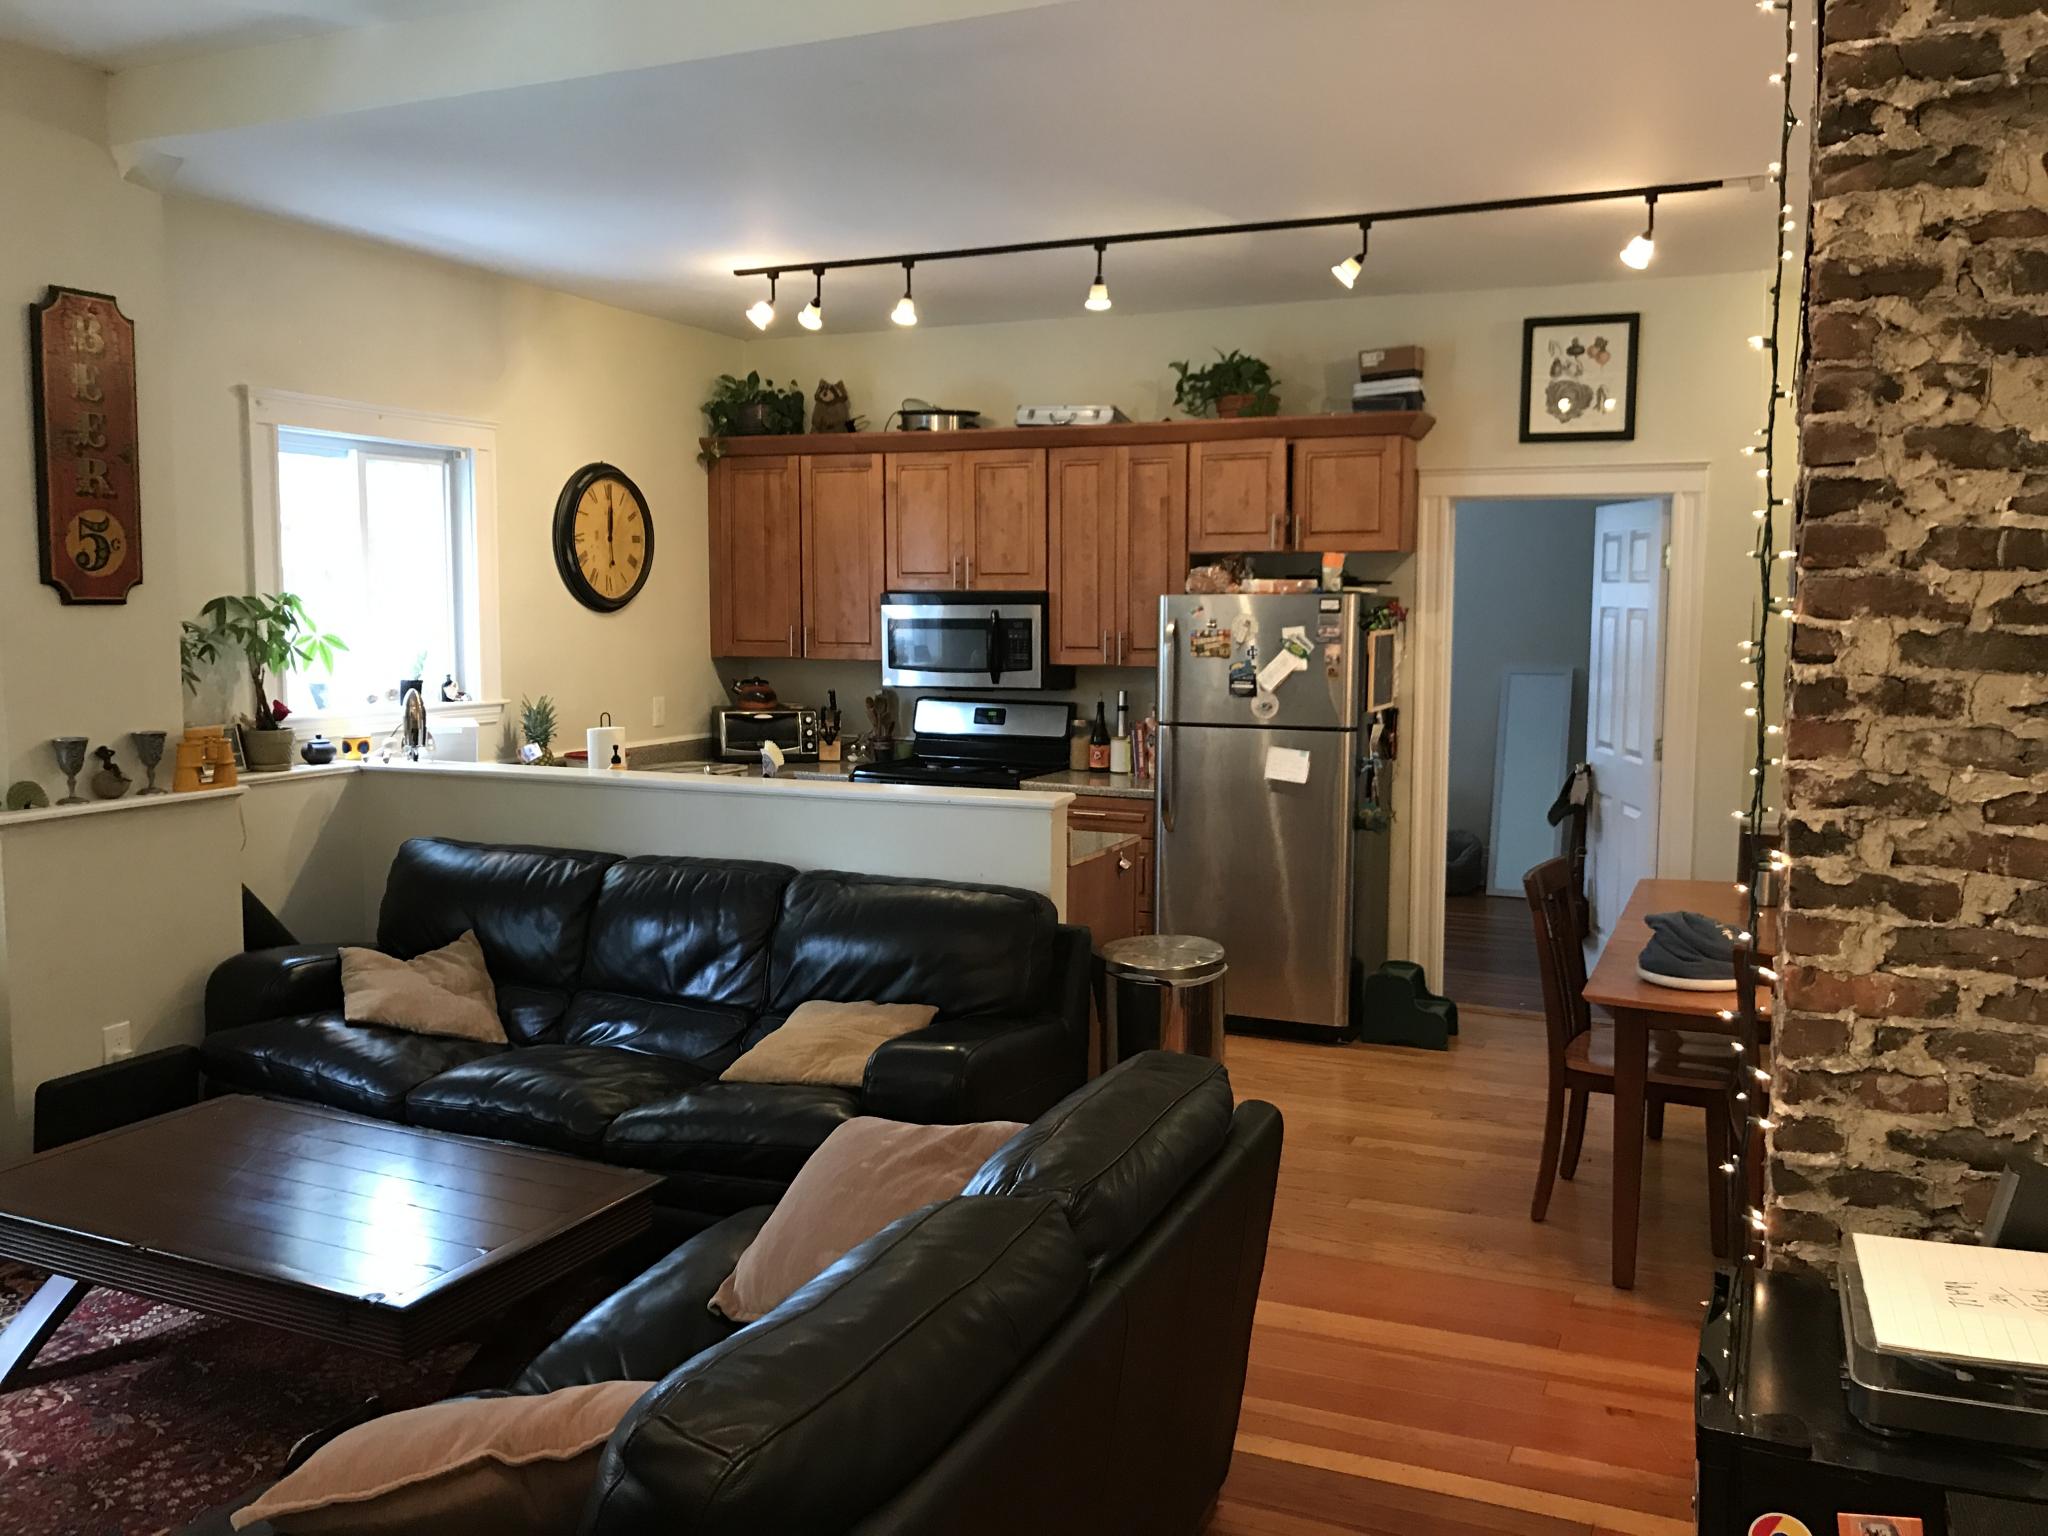 Photos of apartment on Cutter St.,Somerville MA 02145